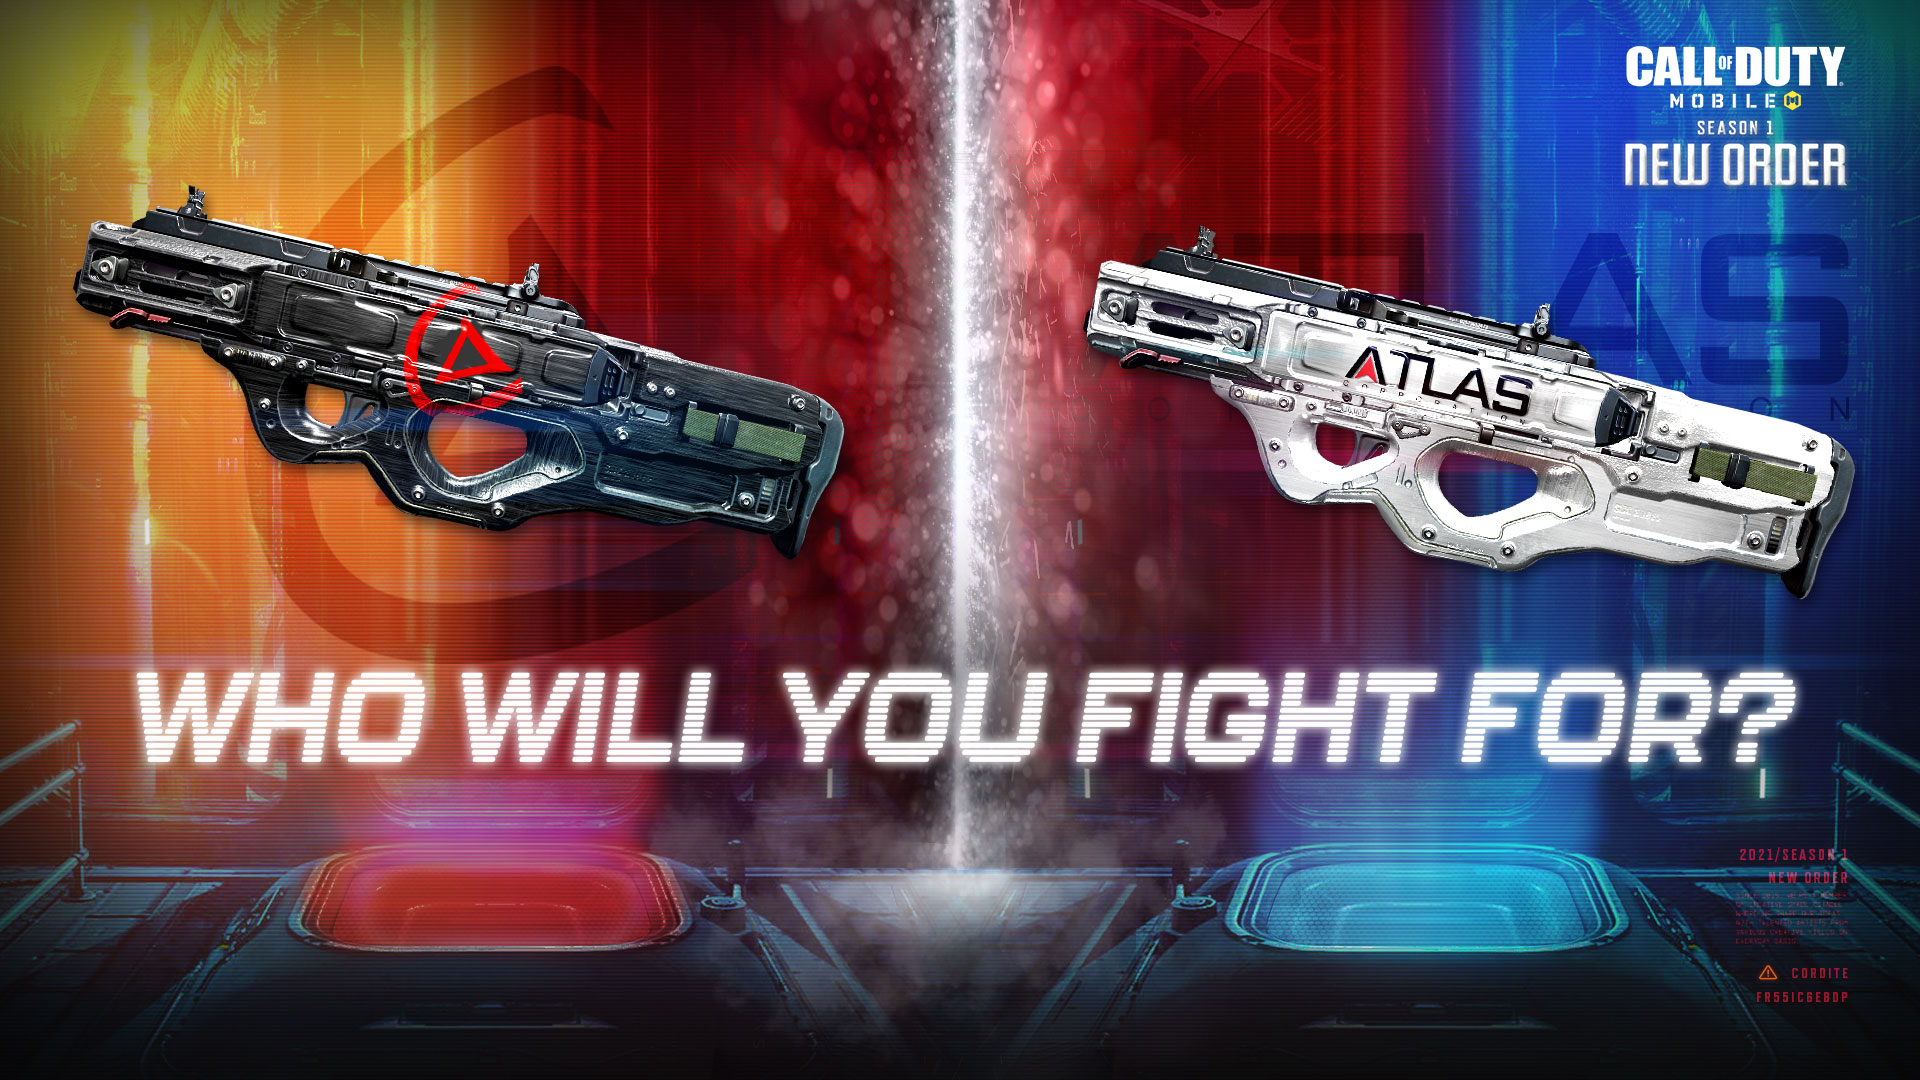 Introducing The Fight For Humanity Event Now Live In Season 1 Of Call Of Duty Mobile